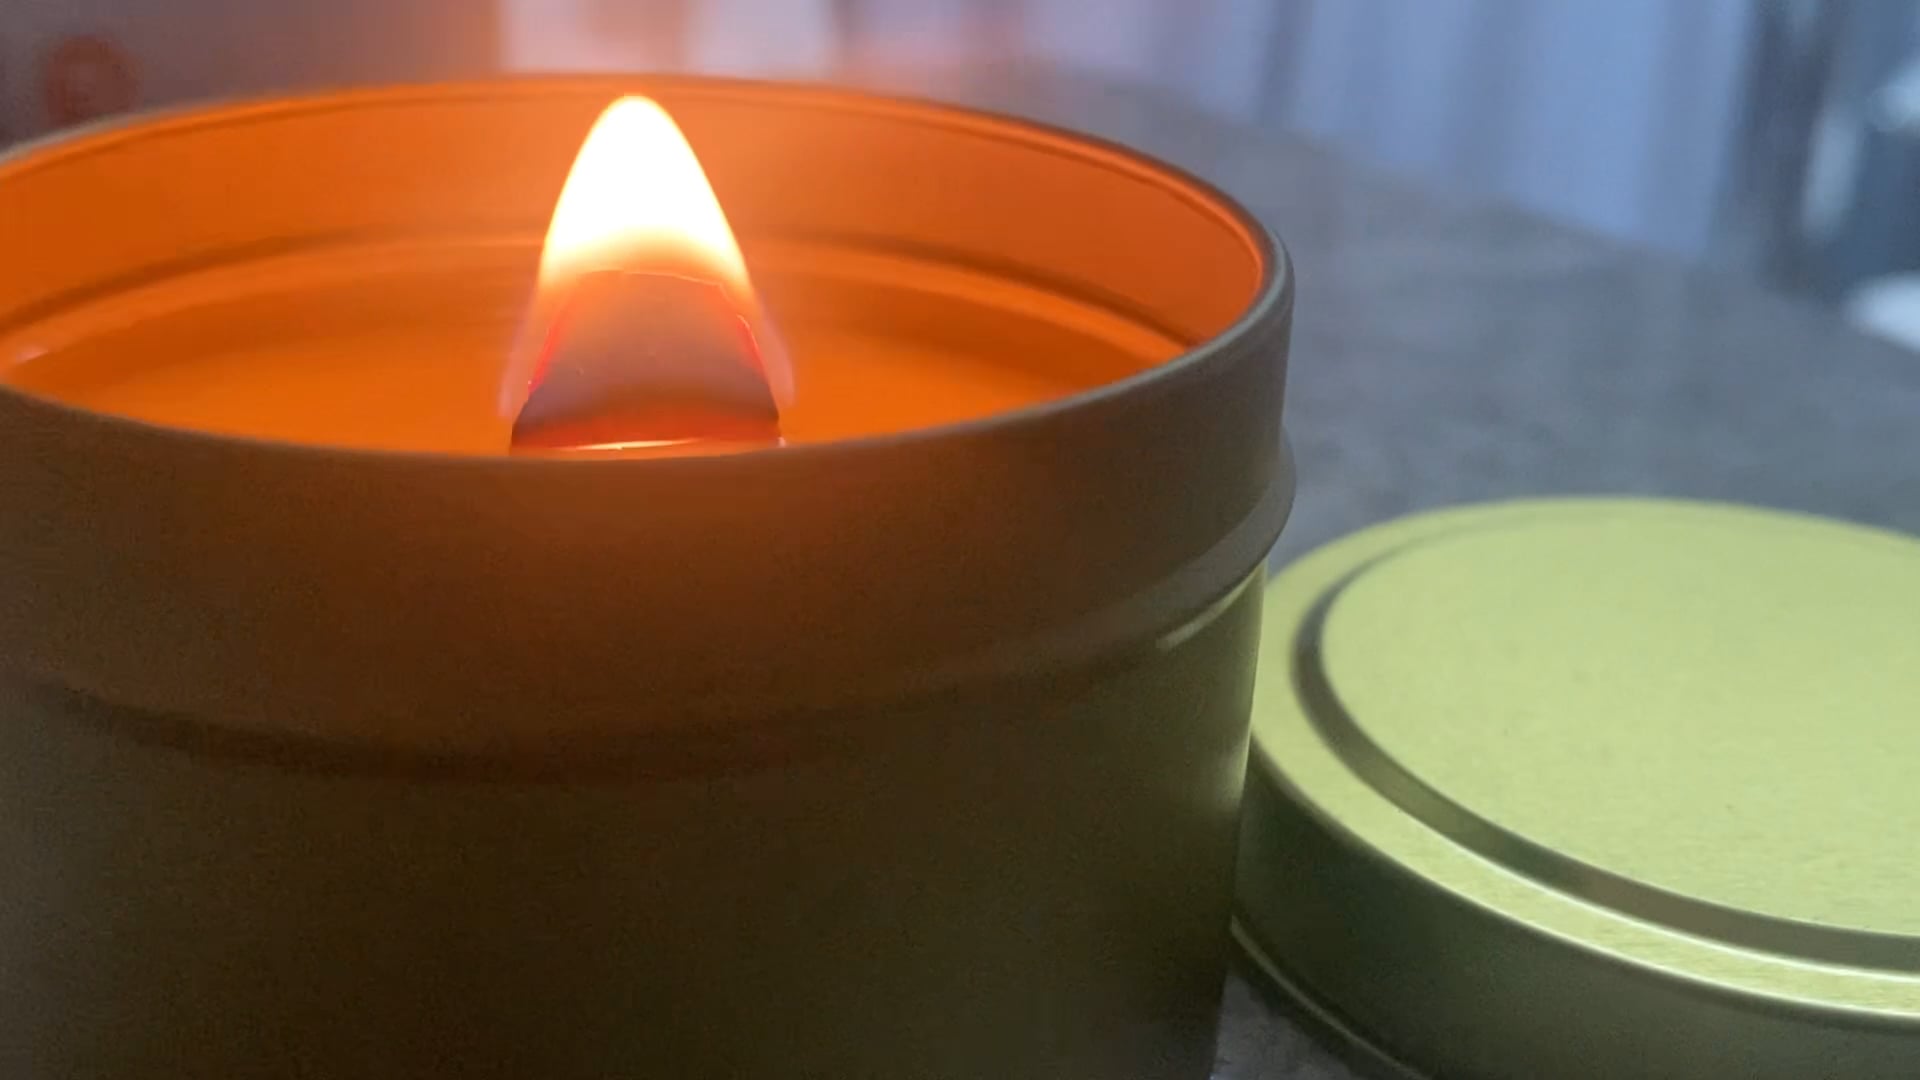 Wood Wick Vs Cotton Wick For Candle Making - Which One is Better